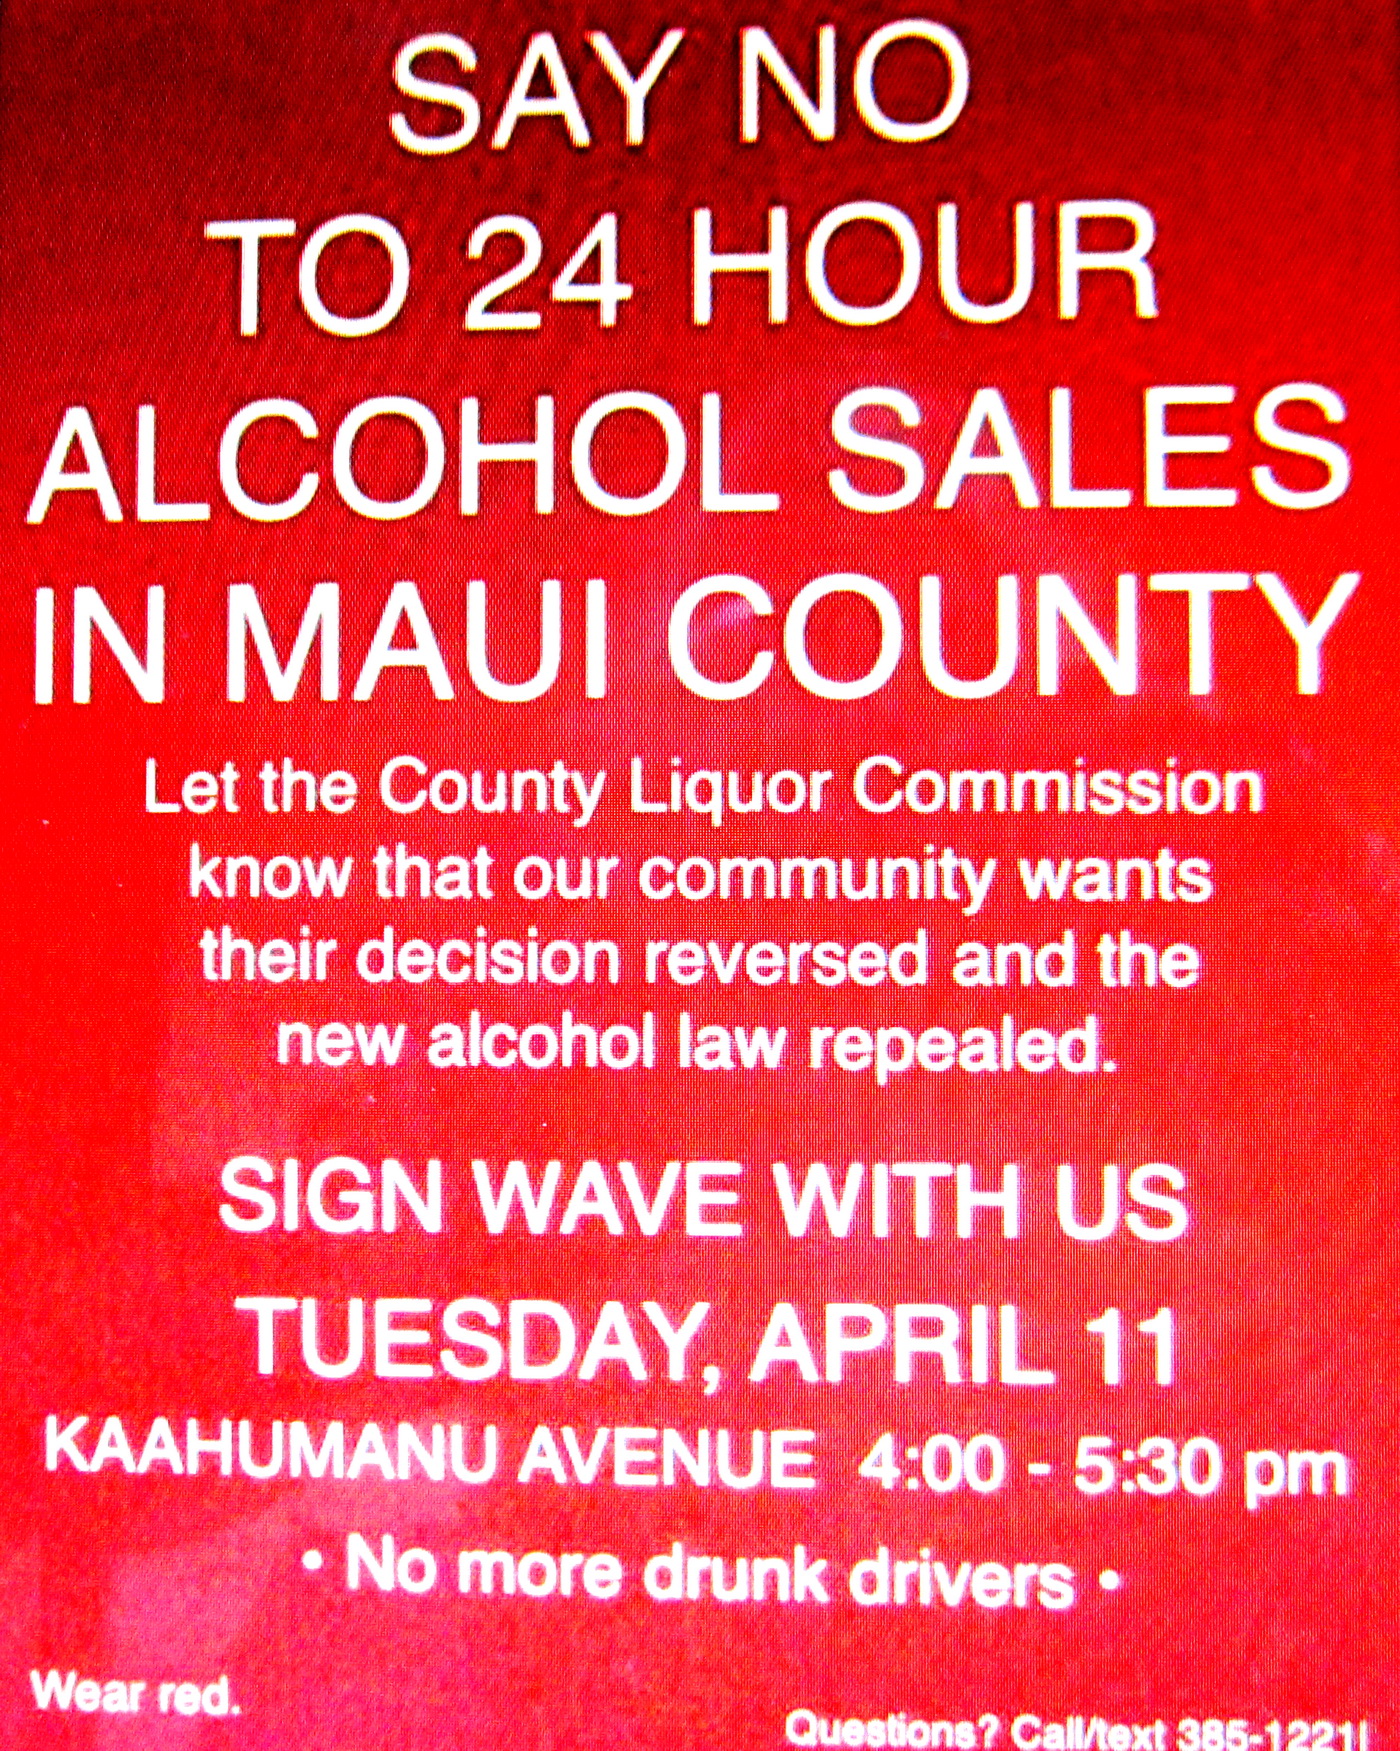 Groundswell of community outrage around booze expansion leads to call for peaceful protest this Tuesday afternoon